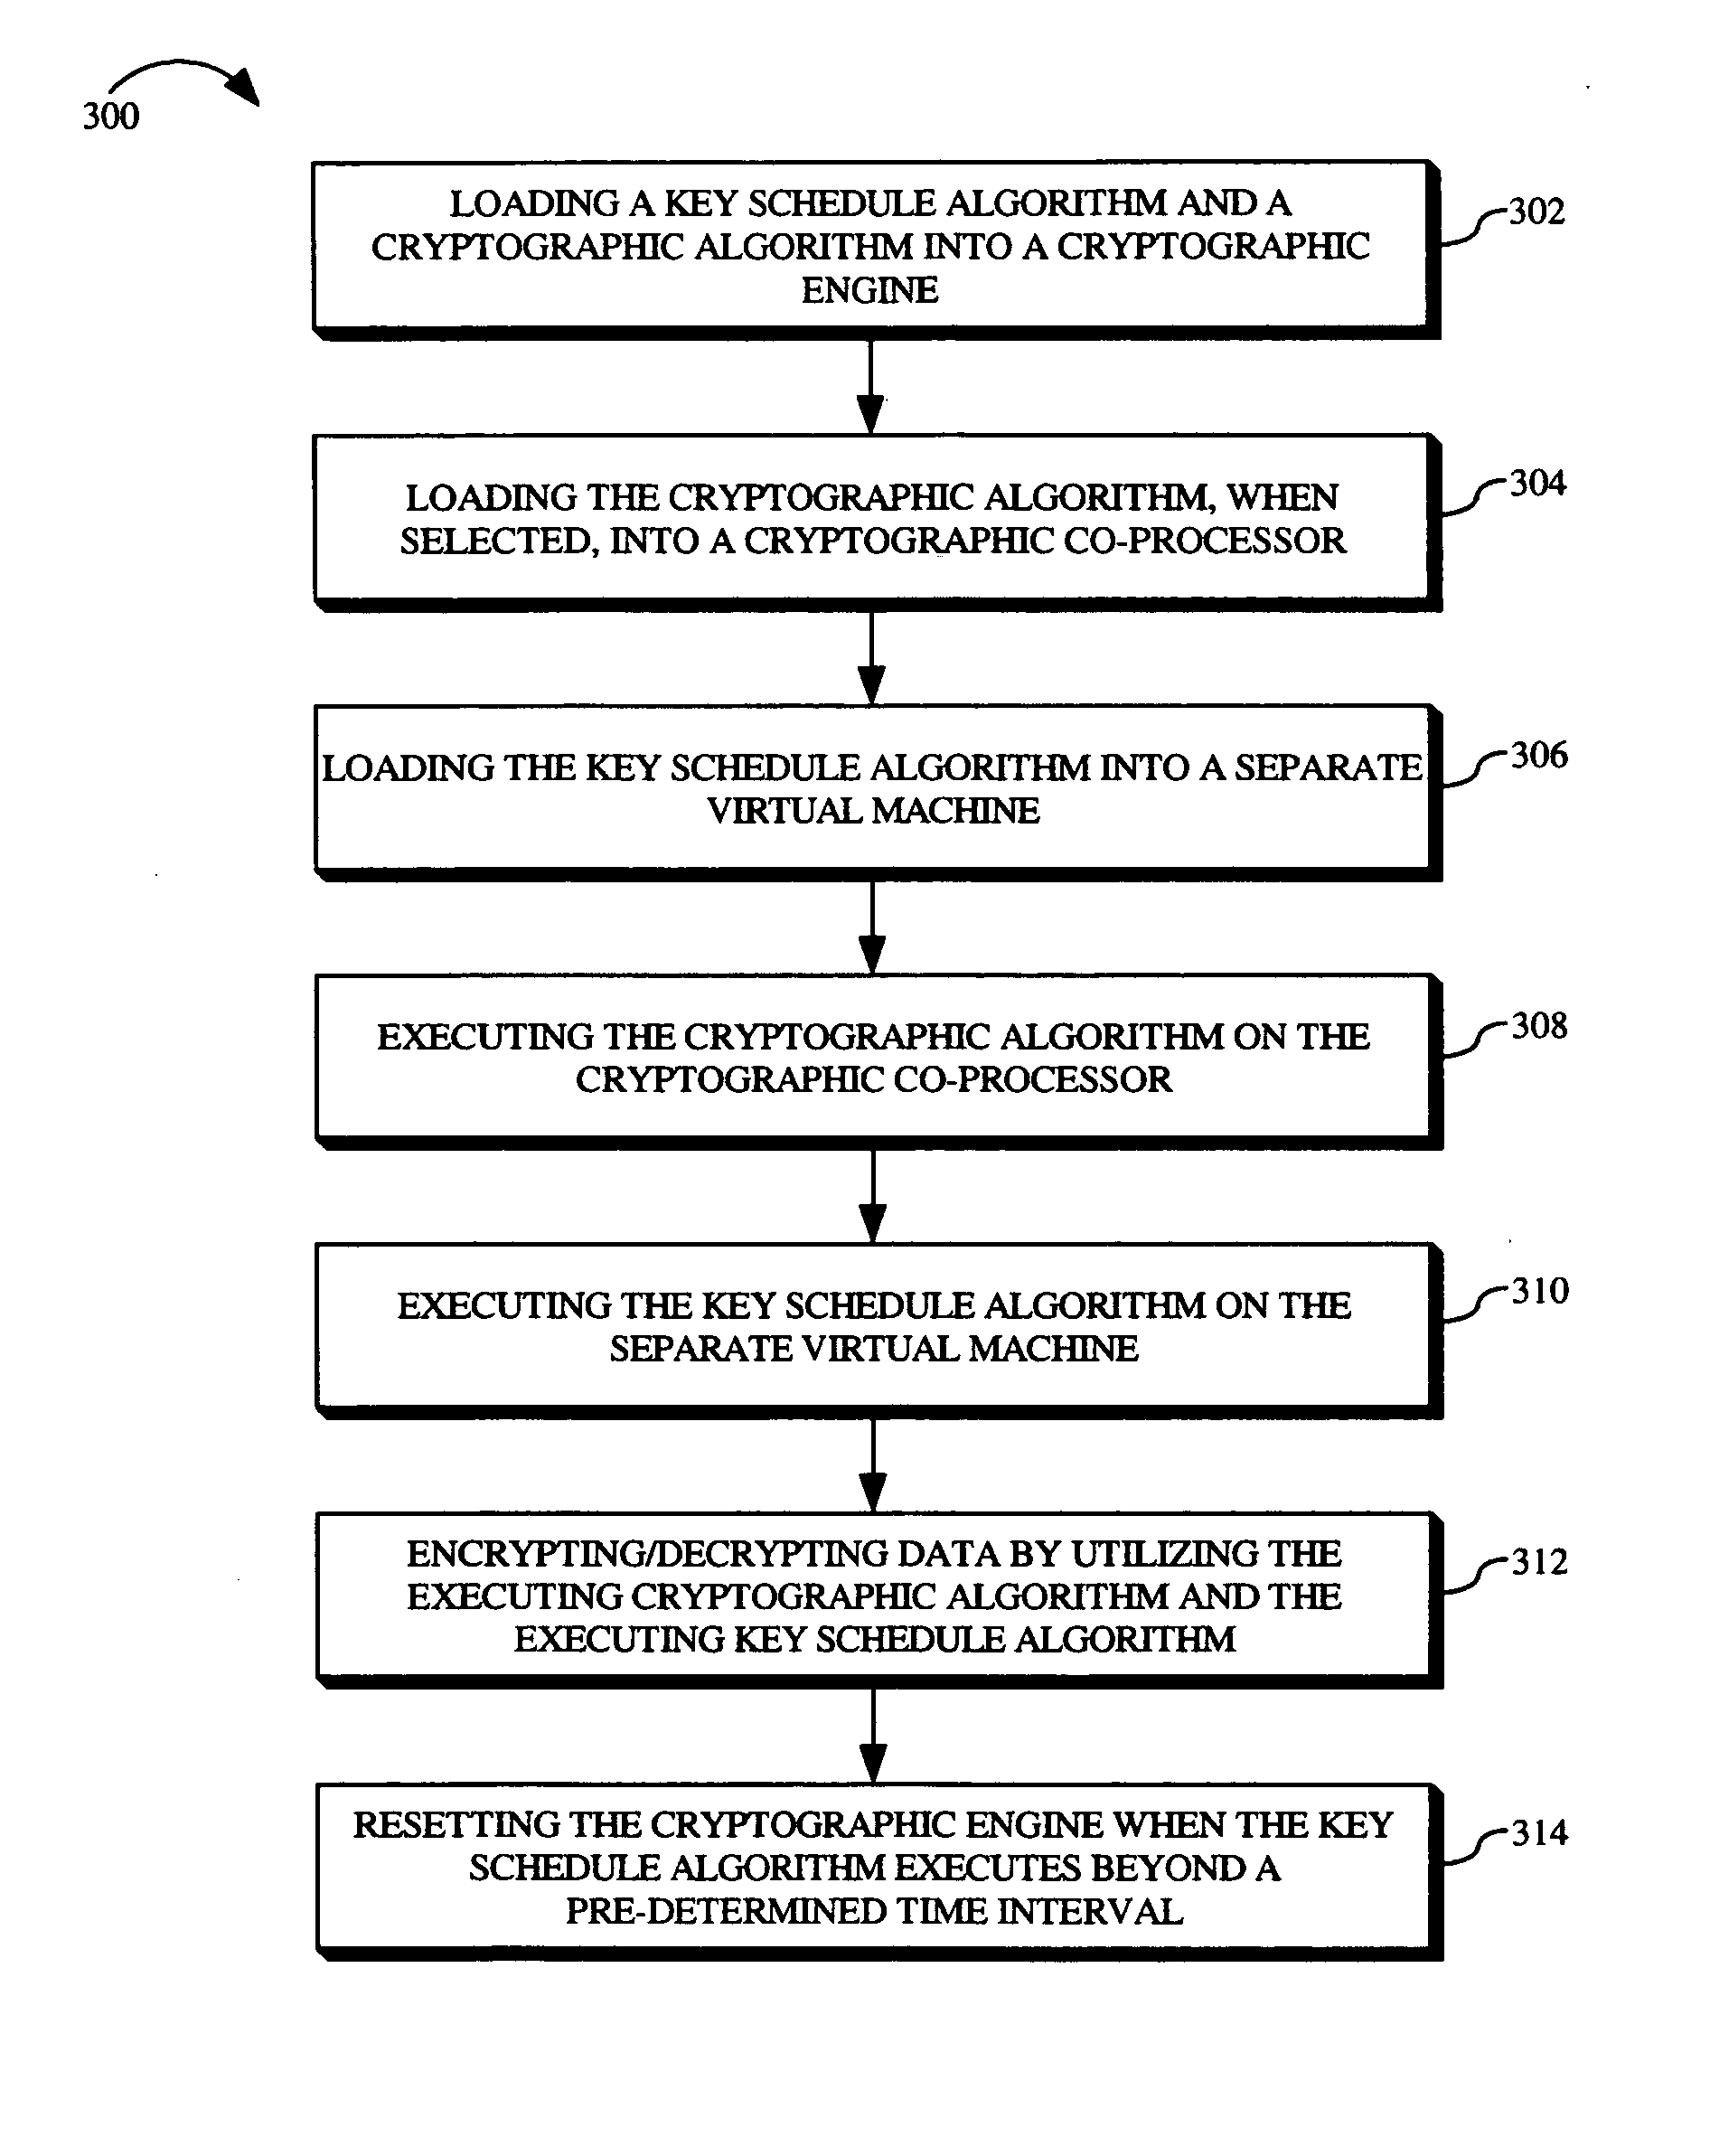 System and method for secure and flexible key schedule generation